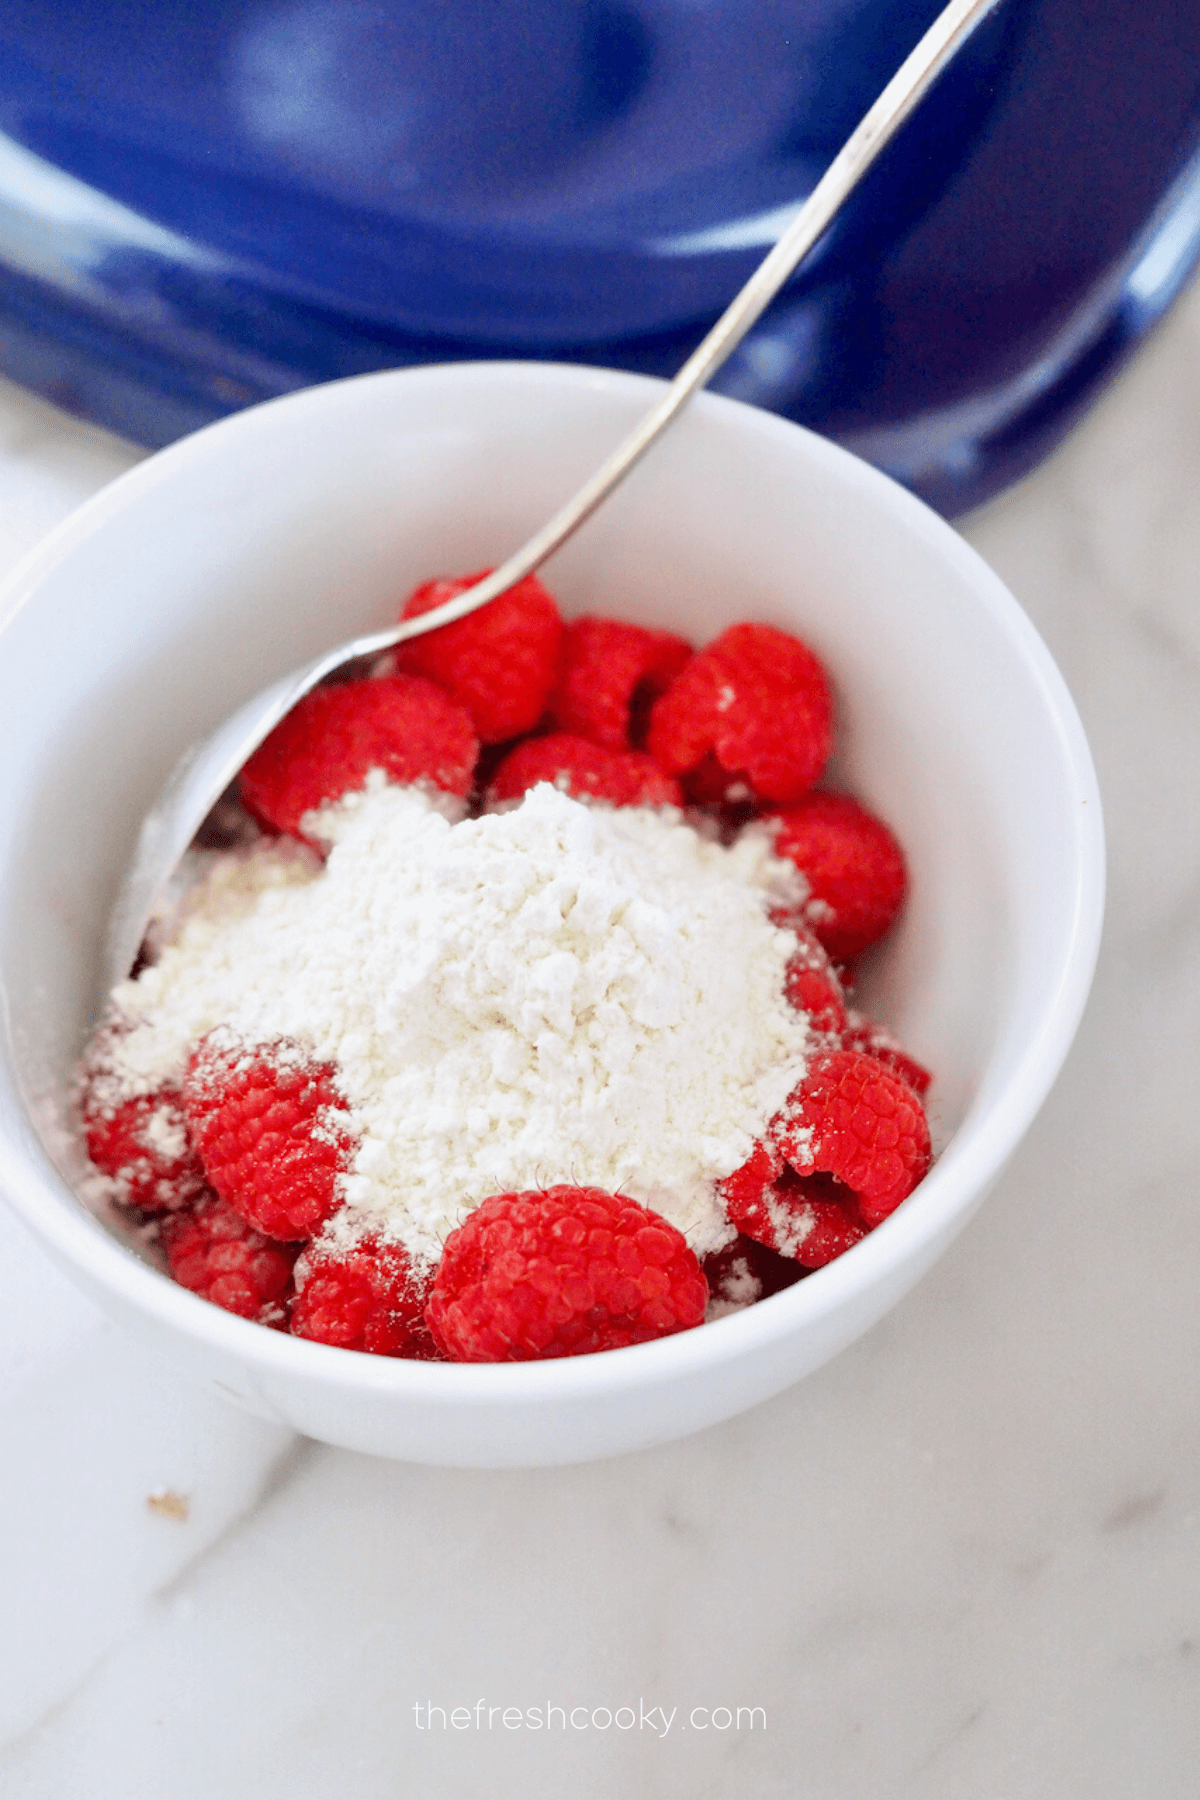 Gently fold 1-2 tablespoons flour to raspberries.